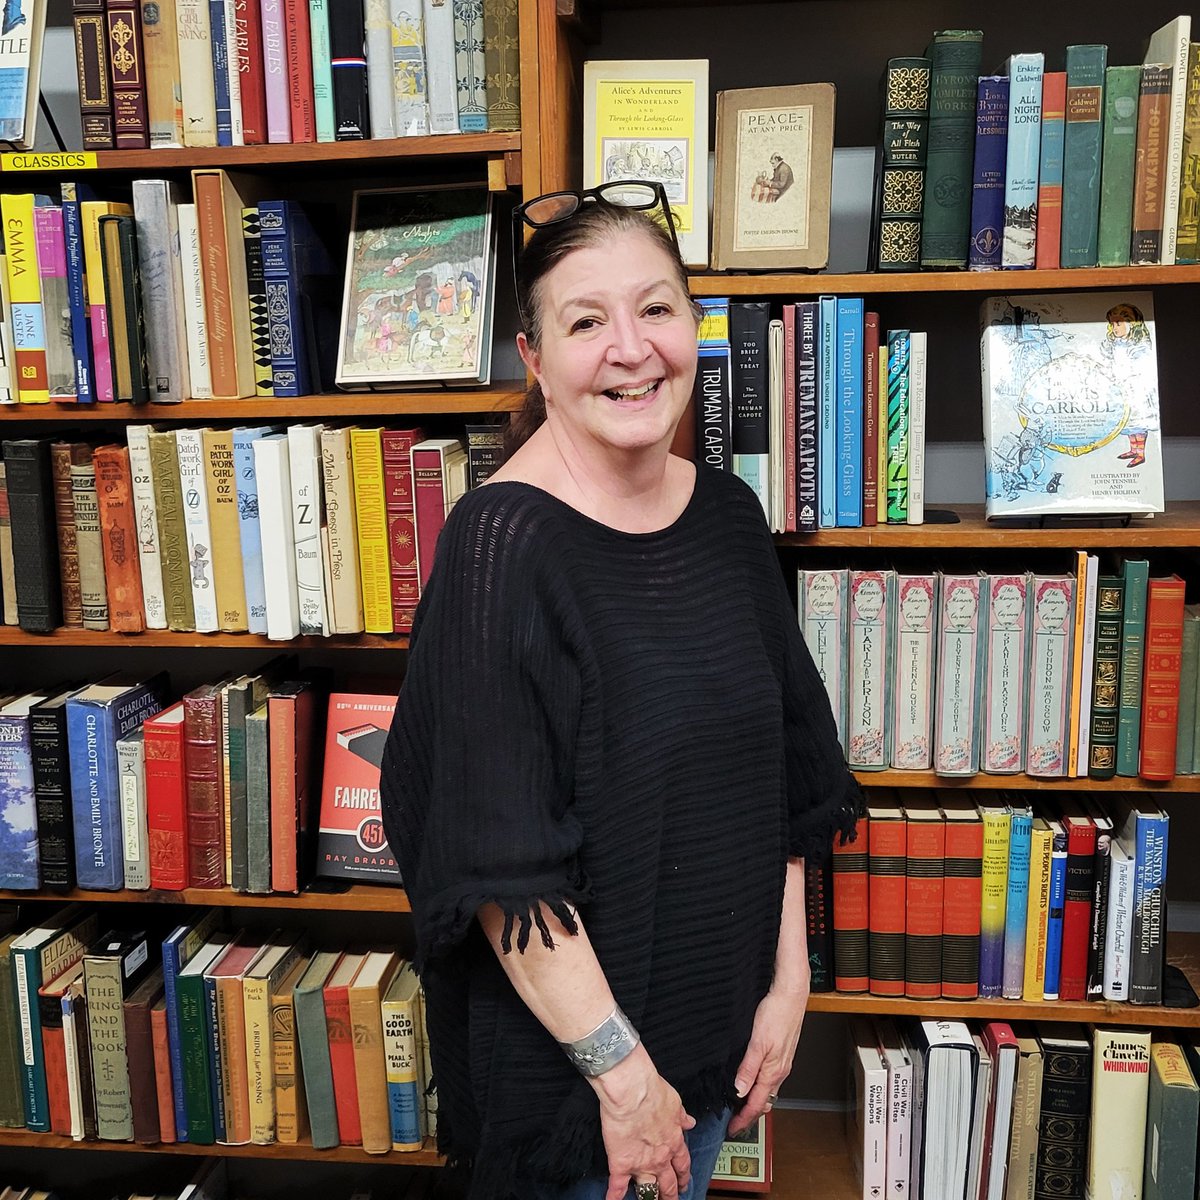 Wishing our Marissa the fondest of farewells and the very best wishes as she heads to Baltimore for new adventures. She's a true friend, a wonderful part of @sanmarcobooks, and she'll be missed. Goodbye is too hard, so happy reading and visit soon! #farewell #shopsmall